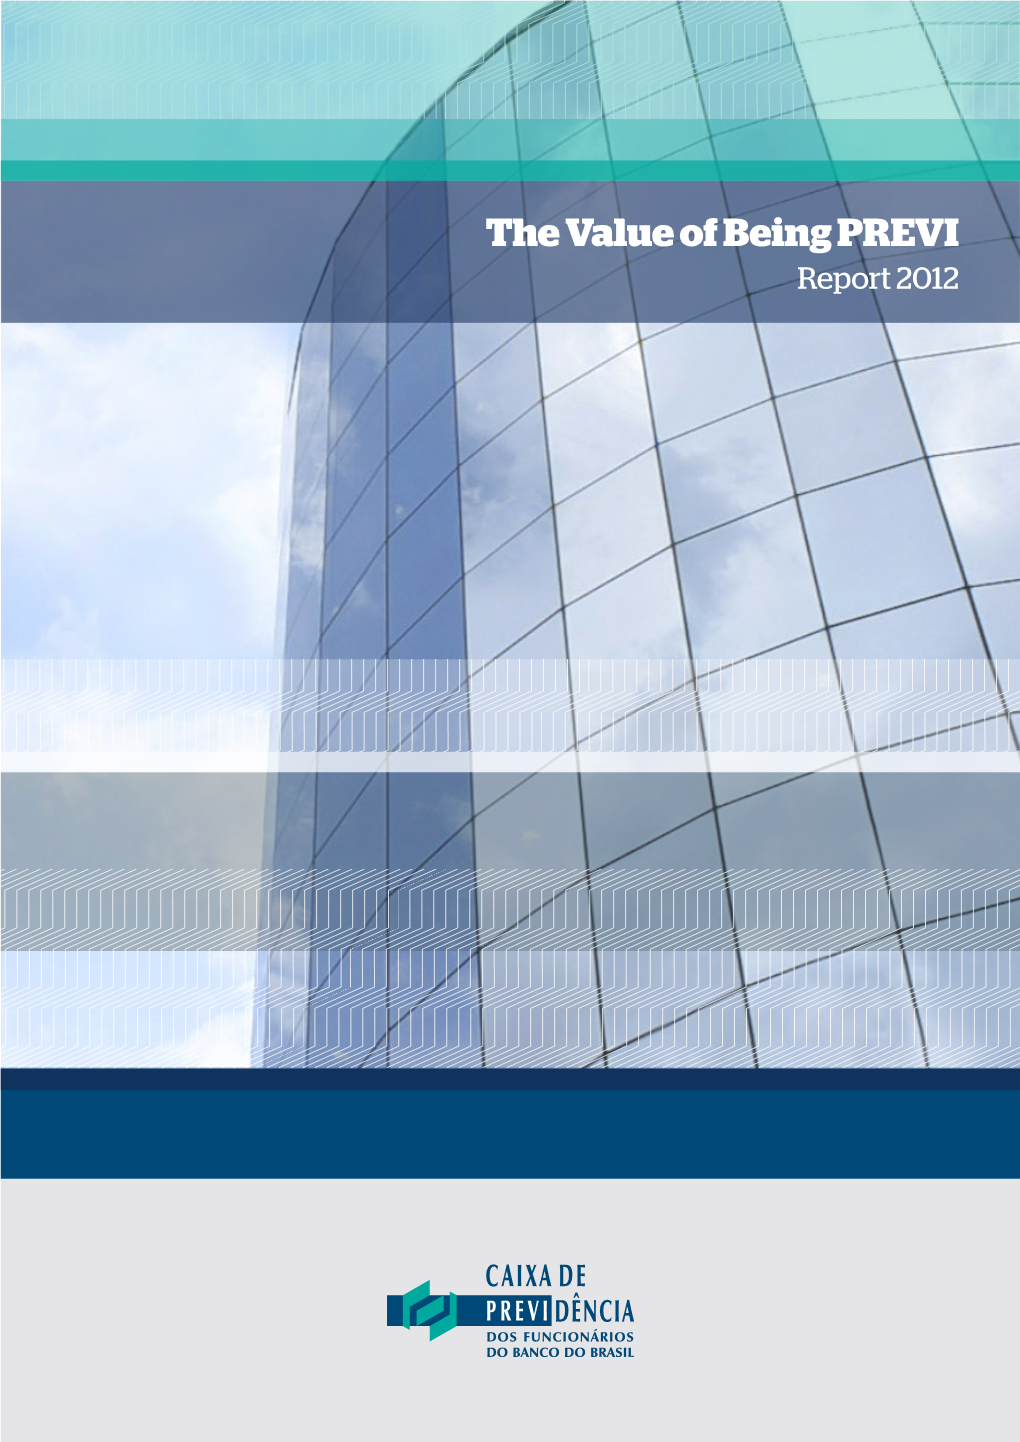 The Value of Being PREVI Report 2012